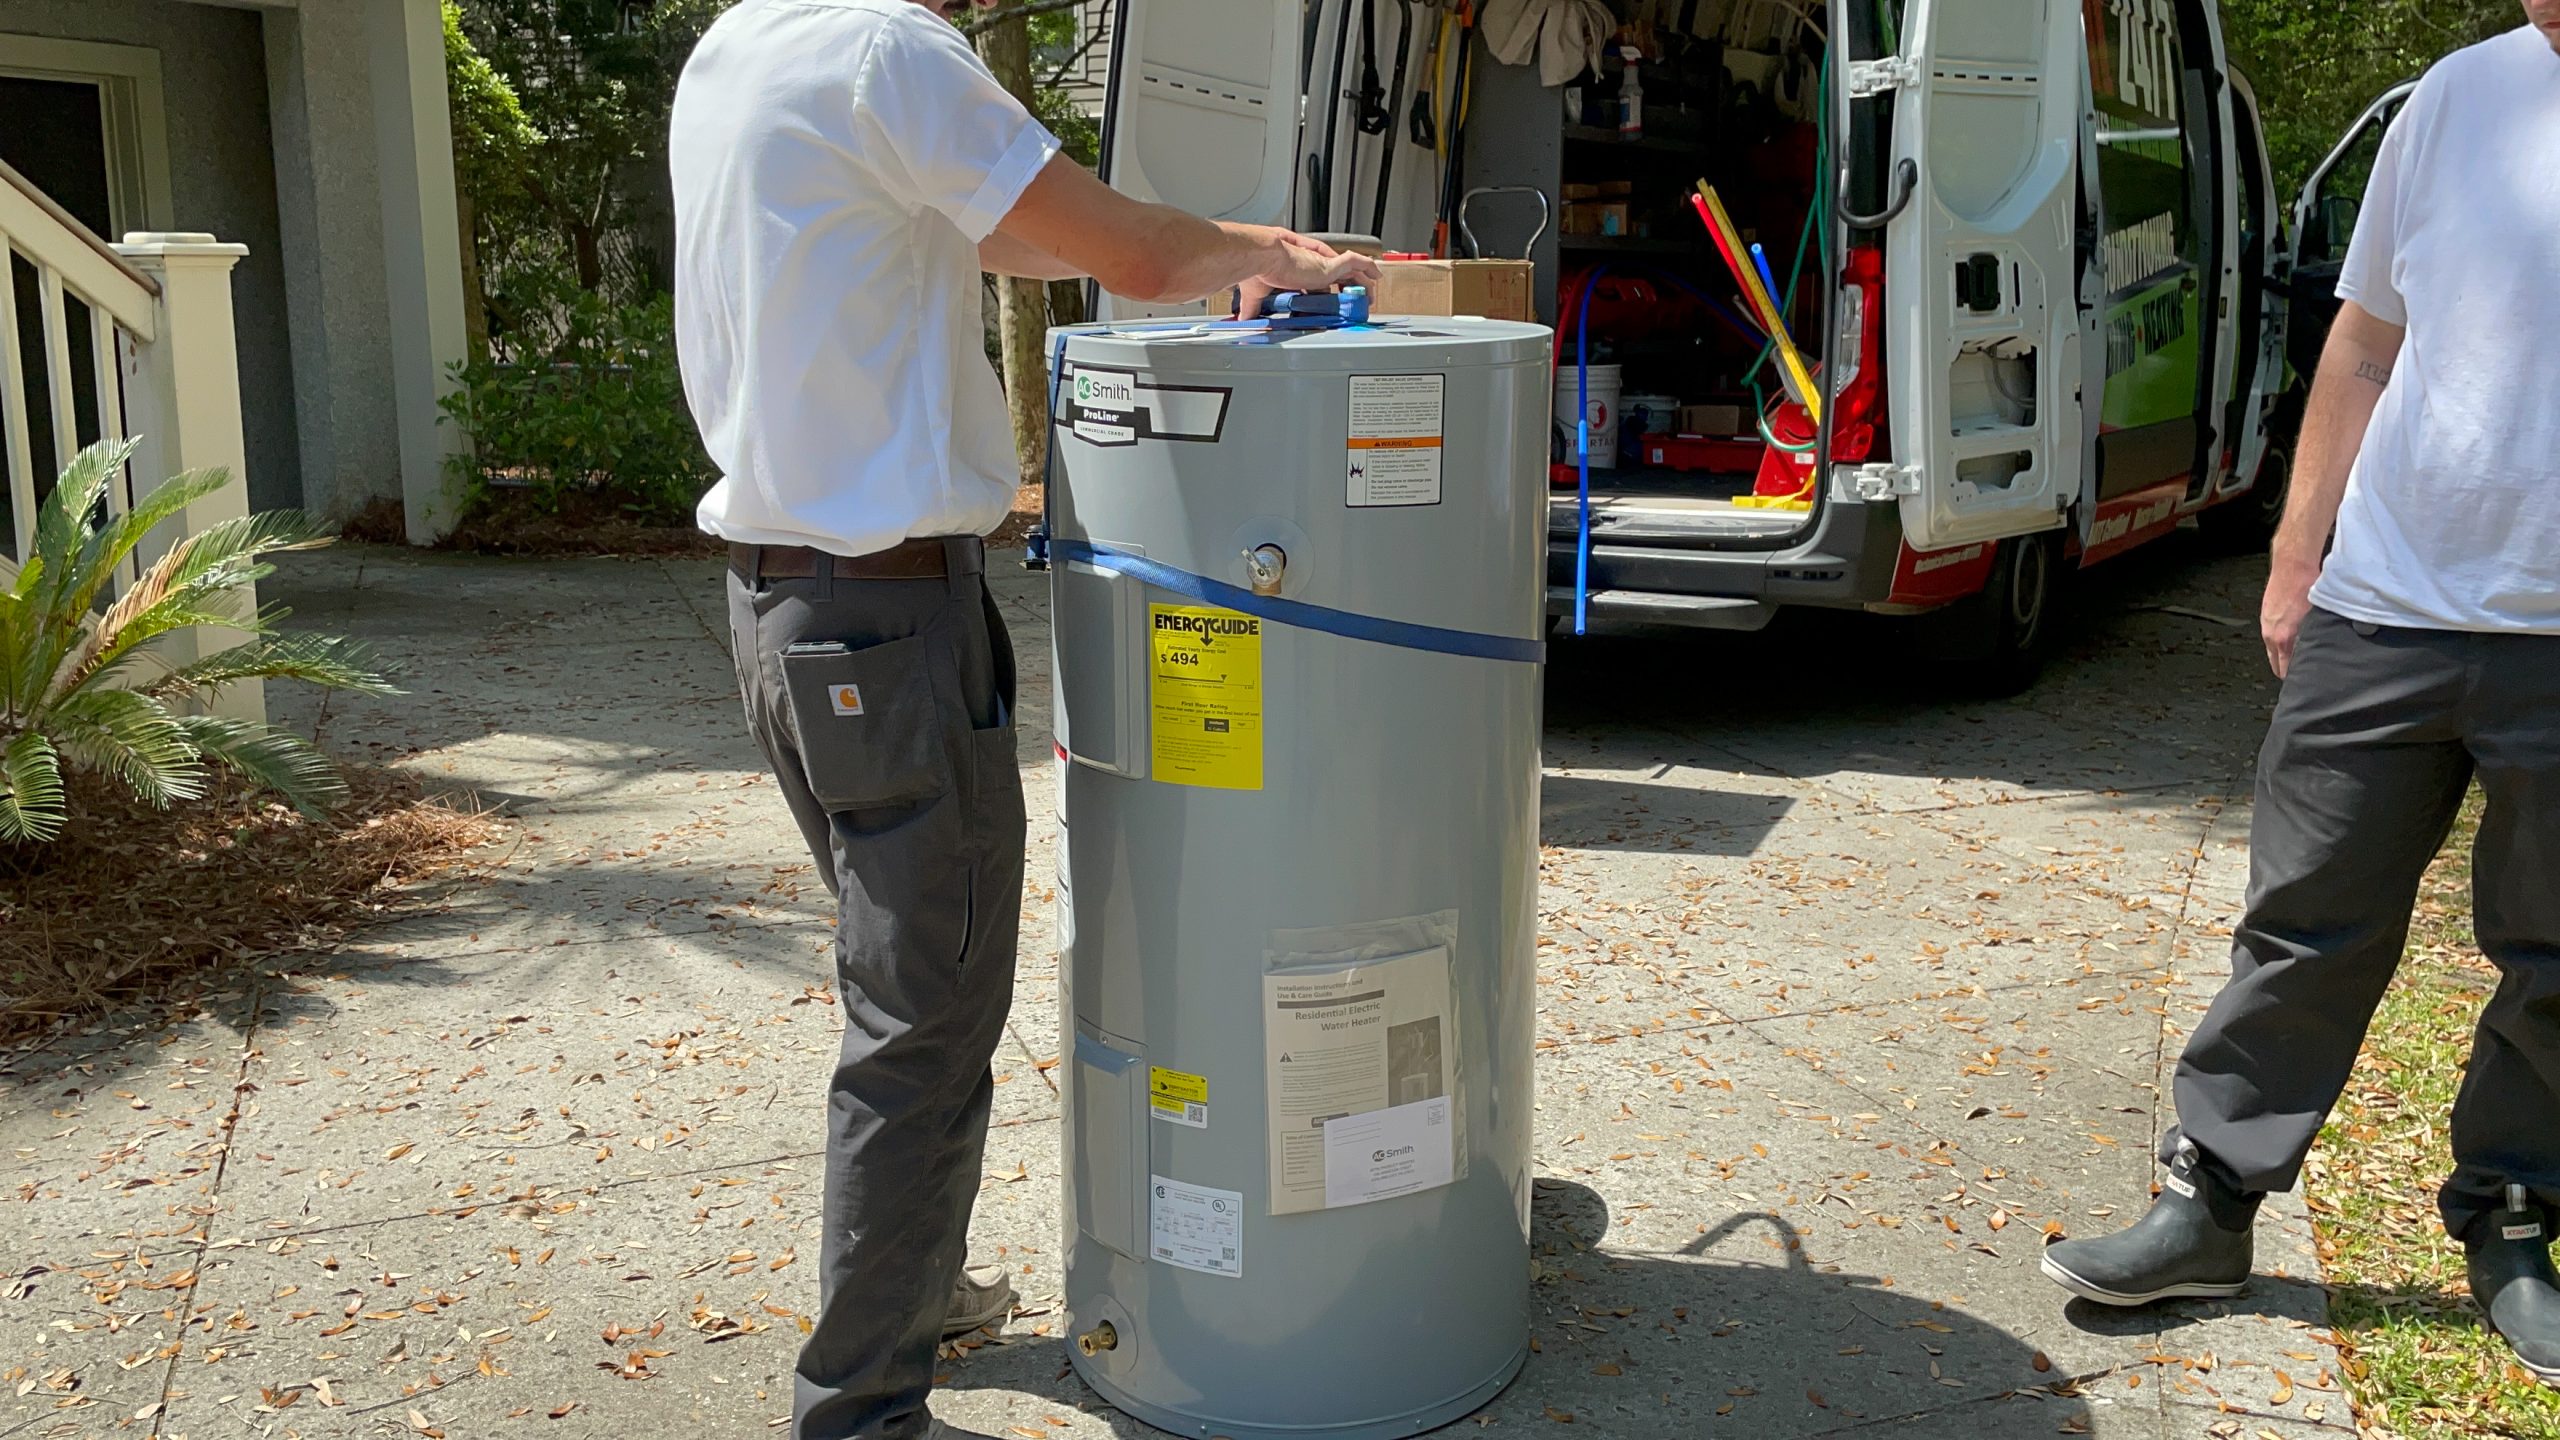 Water Heater Replacement in Charleston, SC from Fix-it 24/7 Air Conditioning, Plumbing & Heating